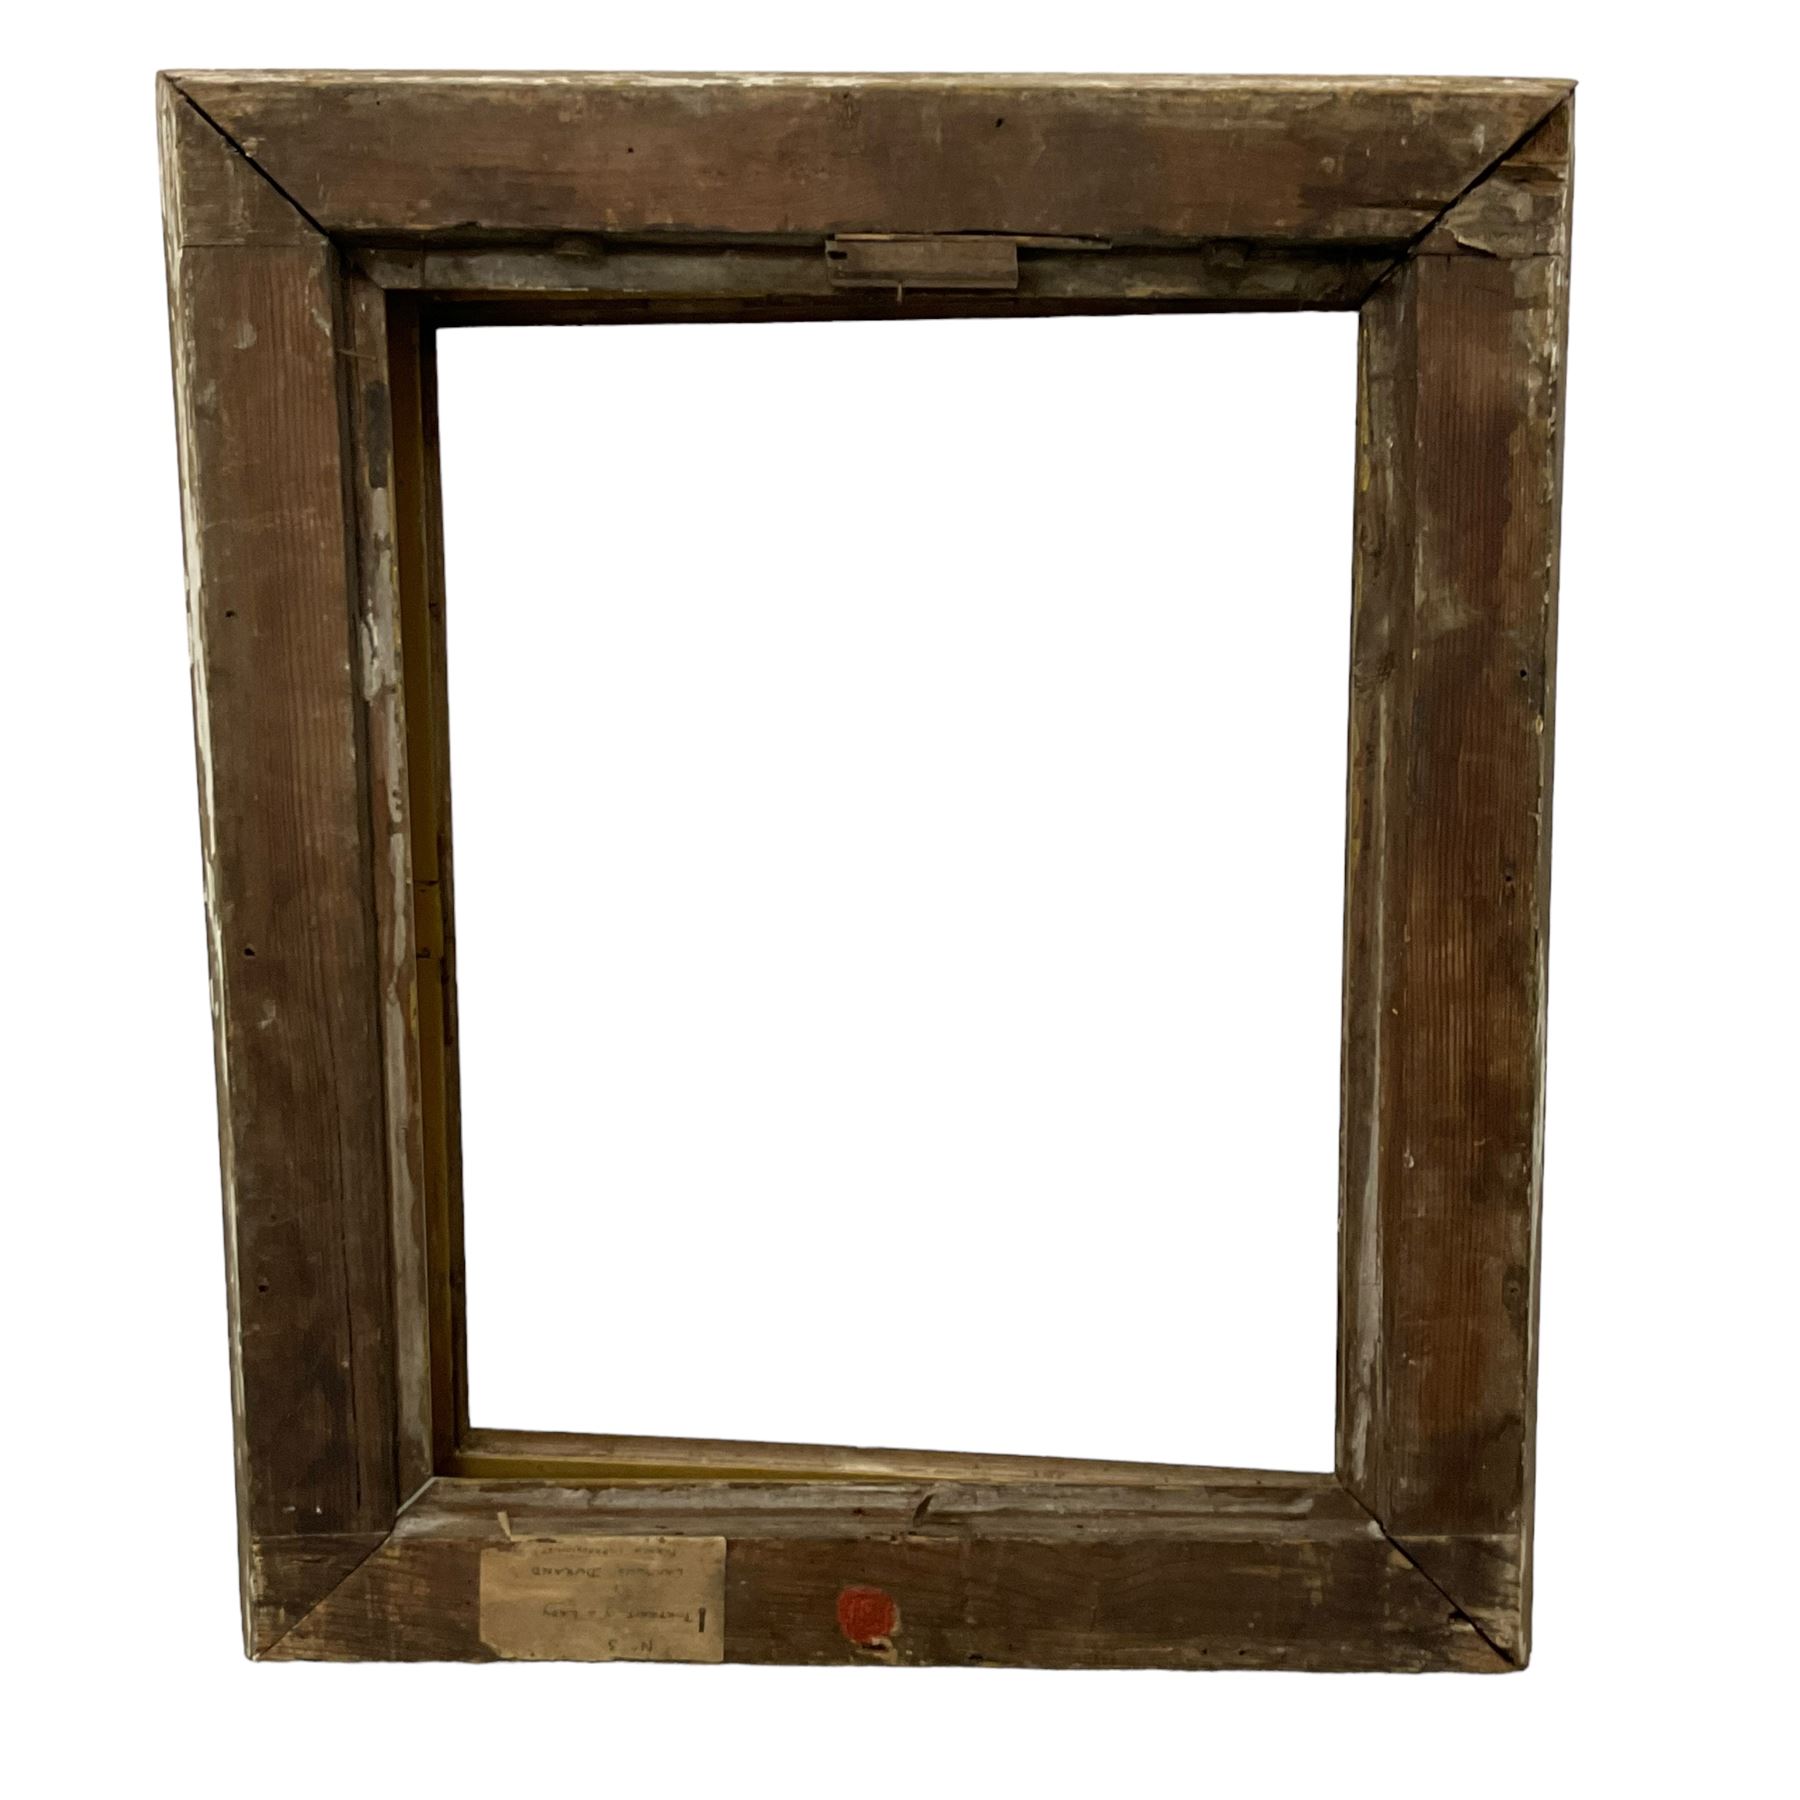 19th century giltwood and gesso frame - Image 2 of 6